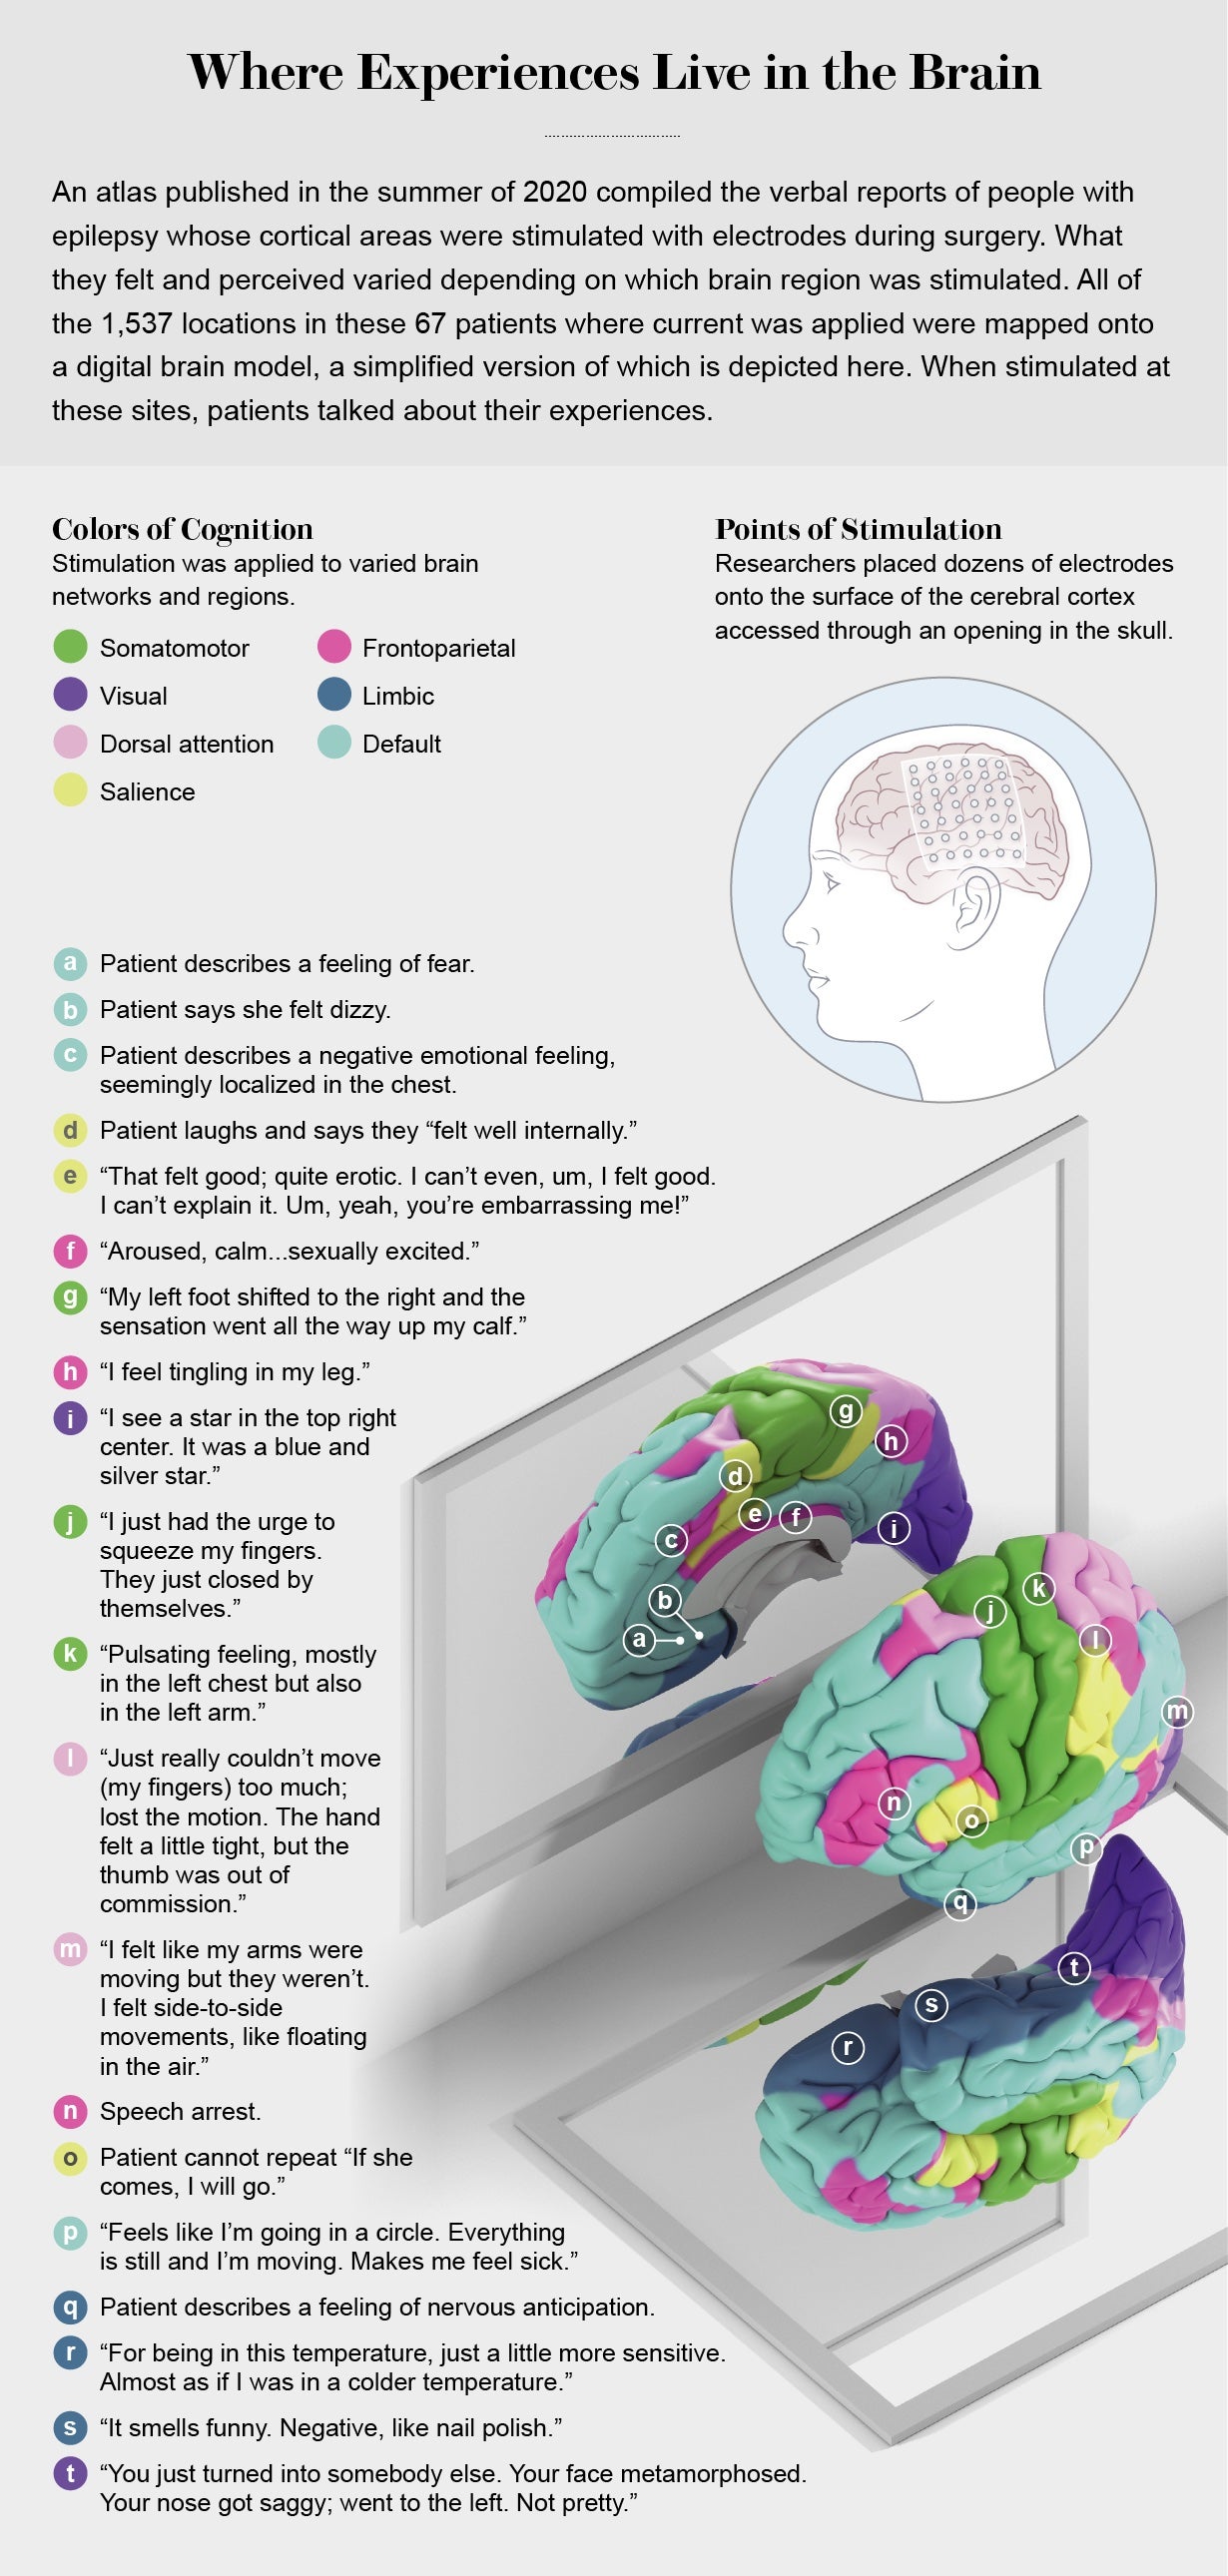 Graphic shows a brain hemisphere colored by region with descriptions of patients’ responses to stimulation of various points.